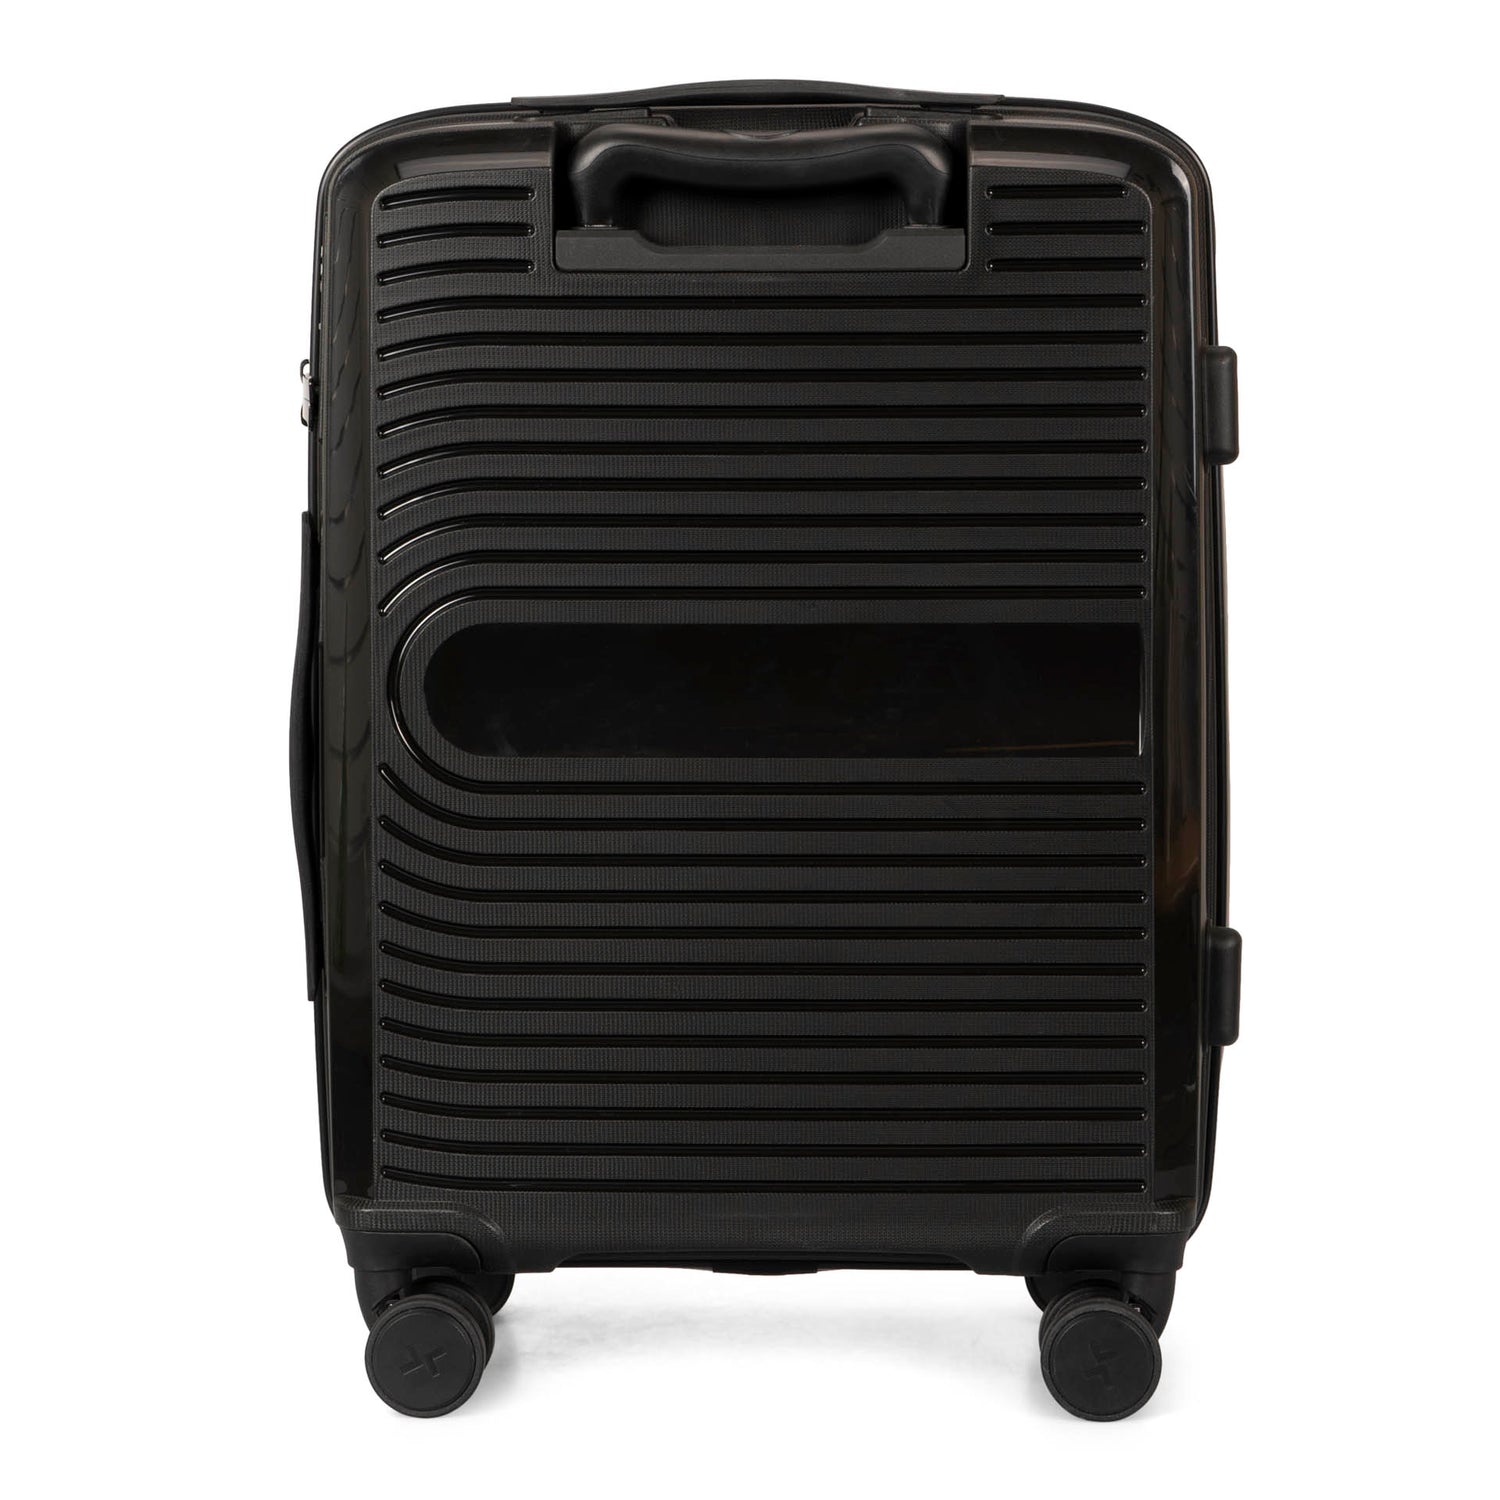 Back side of a black luggage called Dynamo designed by Tracker showing its telescopic handle and lined-pattern shell.